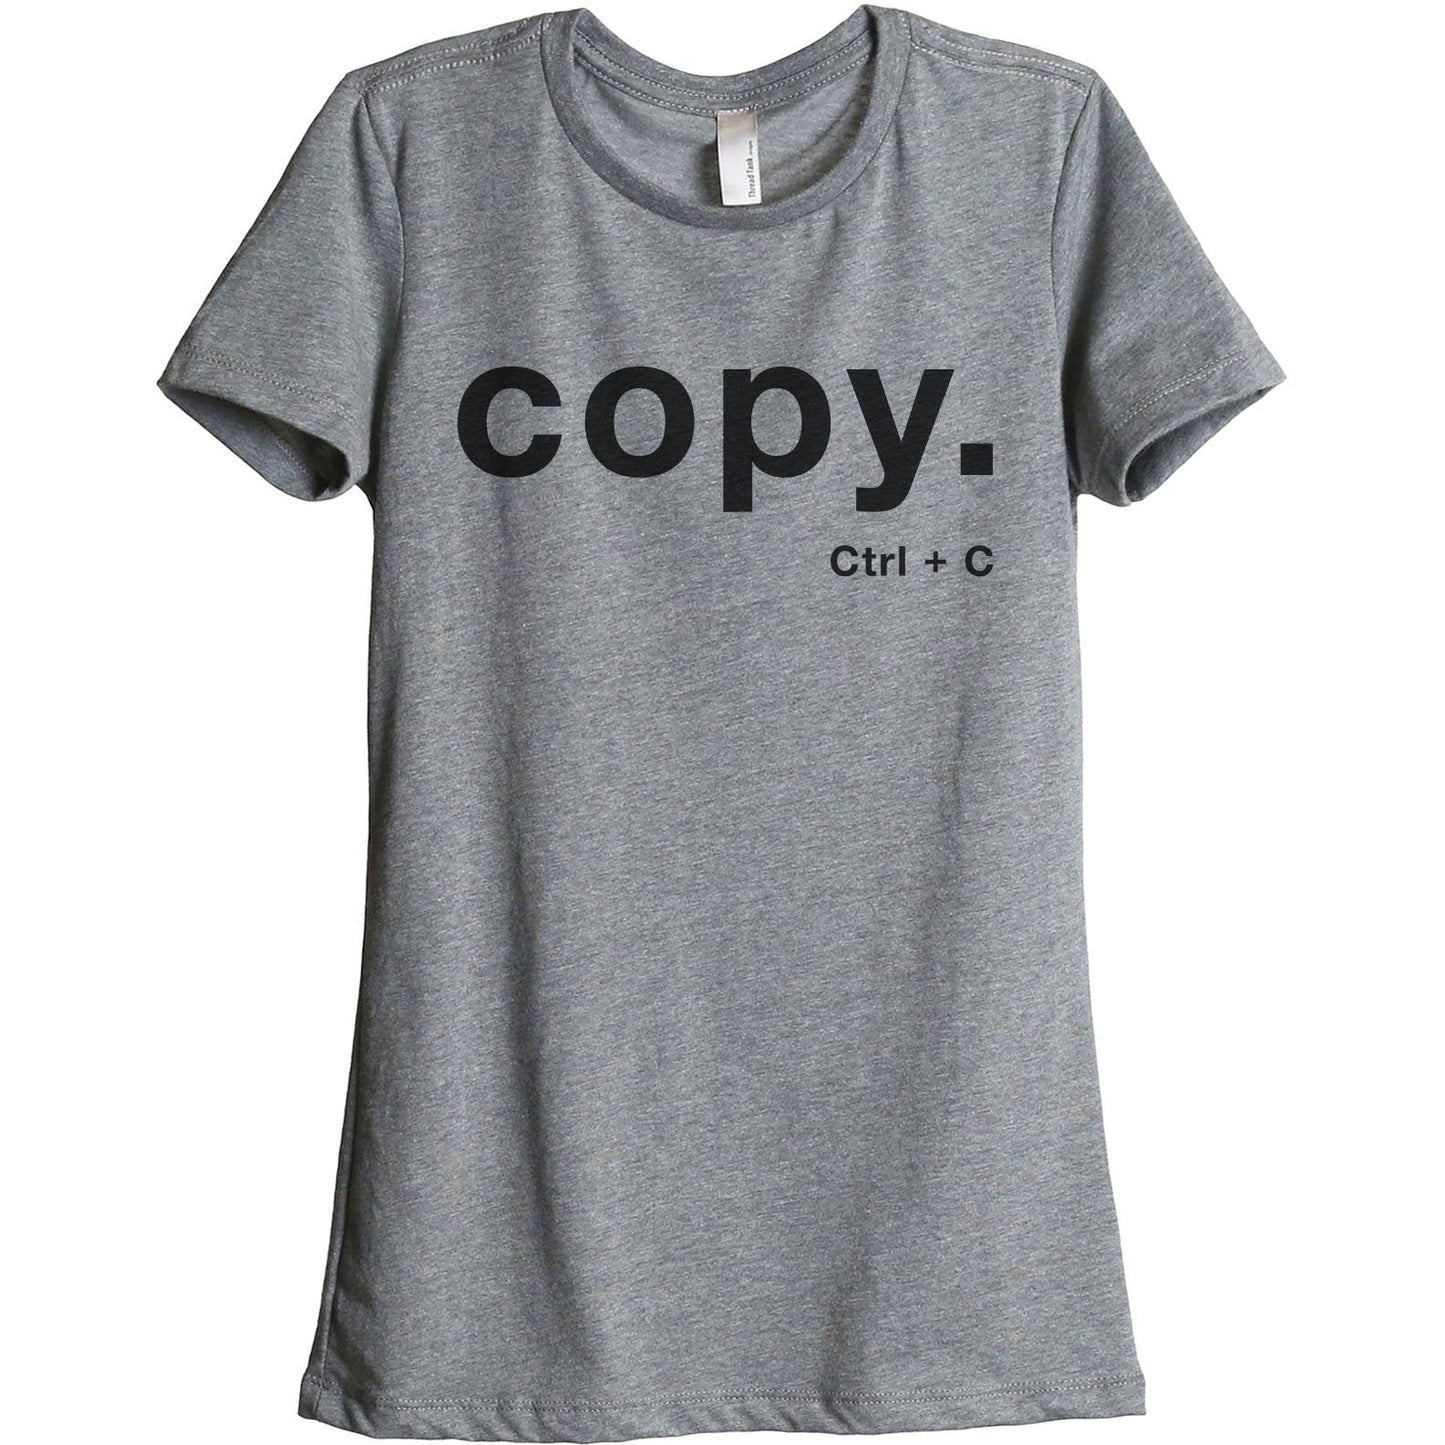 Copy CTRL C - Thread Tank | Stories You Can Wear | T-Shirts, Tank Tops and Sweatshirts